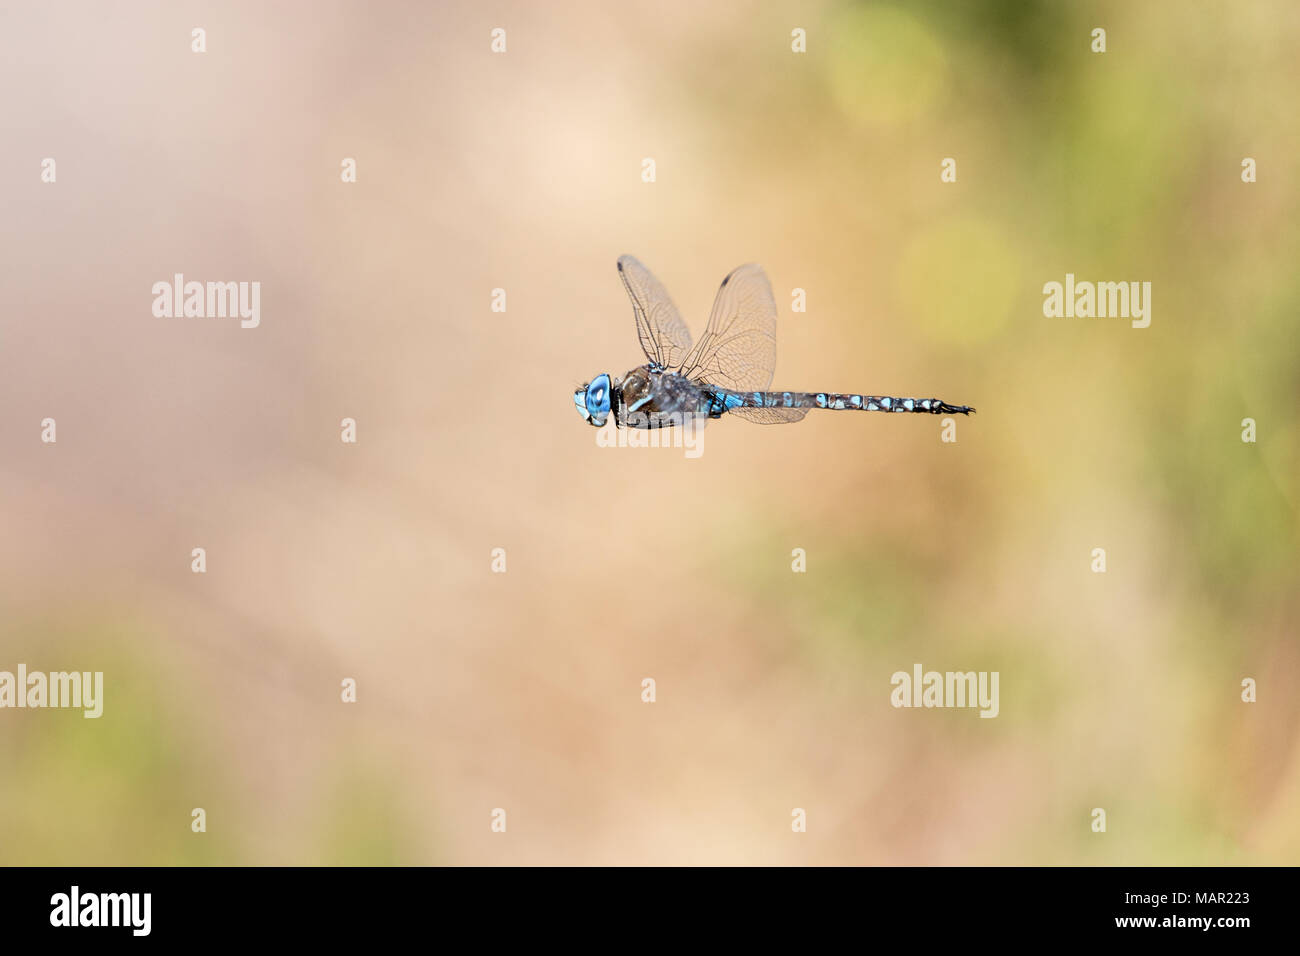 Dragonfly, bright blue, flying mid-air, earthy background tones Stock Photo